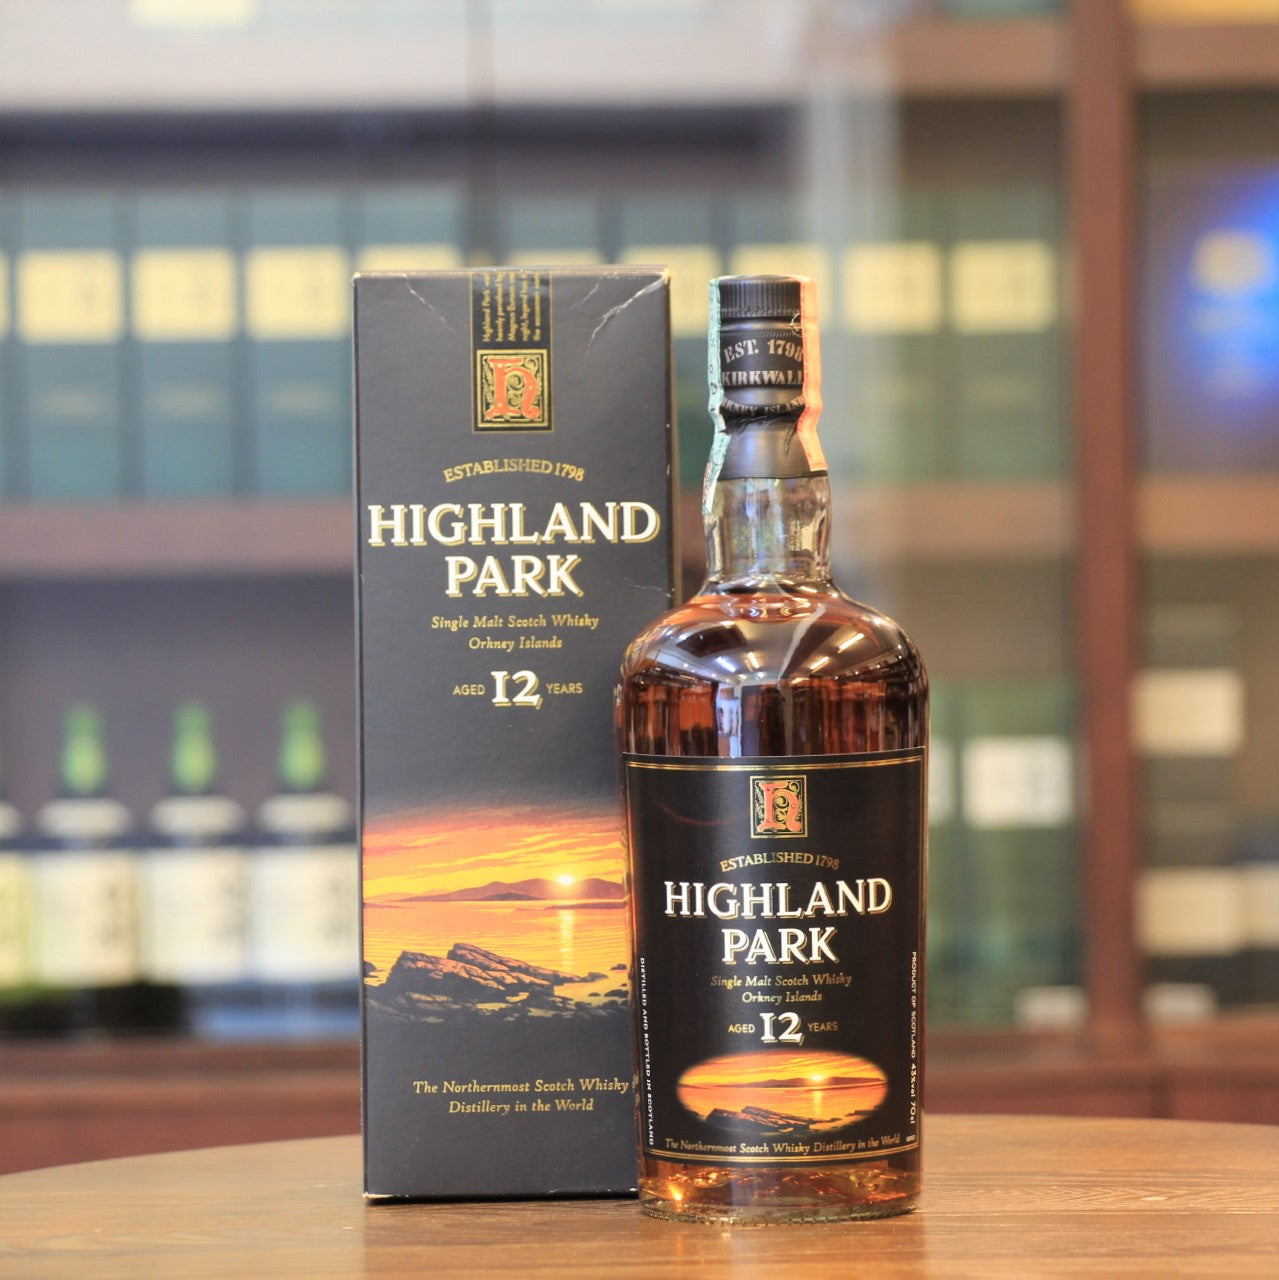 A 12 years old bottling from Highland Park bottled in the 2000s . This classic bottling was one of the favourites of Michael Jackson, the whisky writer (The Malt Whisky Companion). This bottle design was introduced by Edrington in 1999 and used until it was redesigned in 2006. Please note that the box has slight creasing in some places given the vintage.